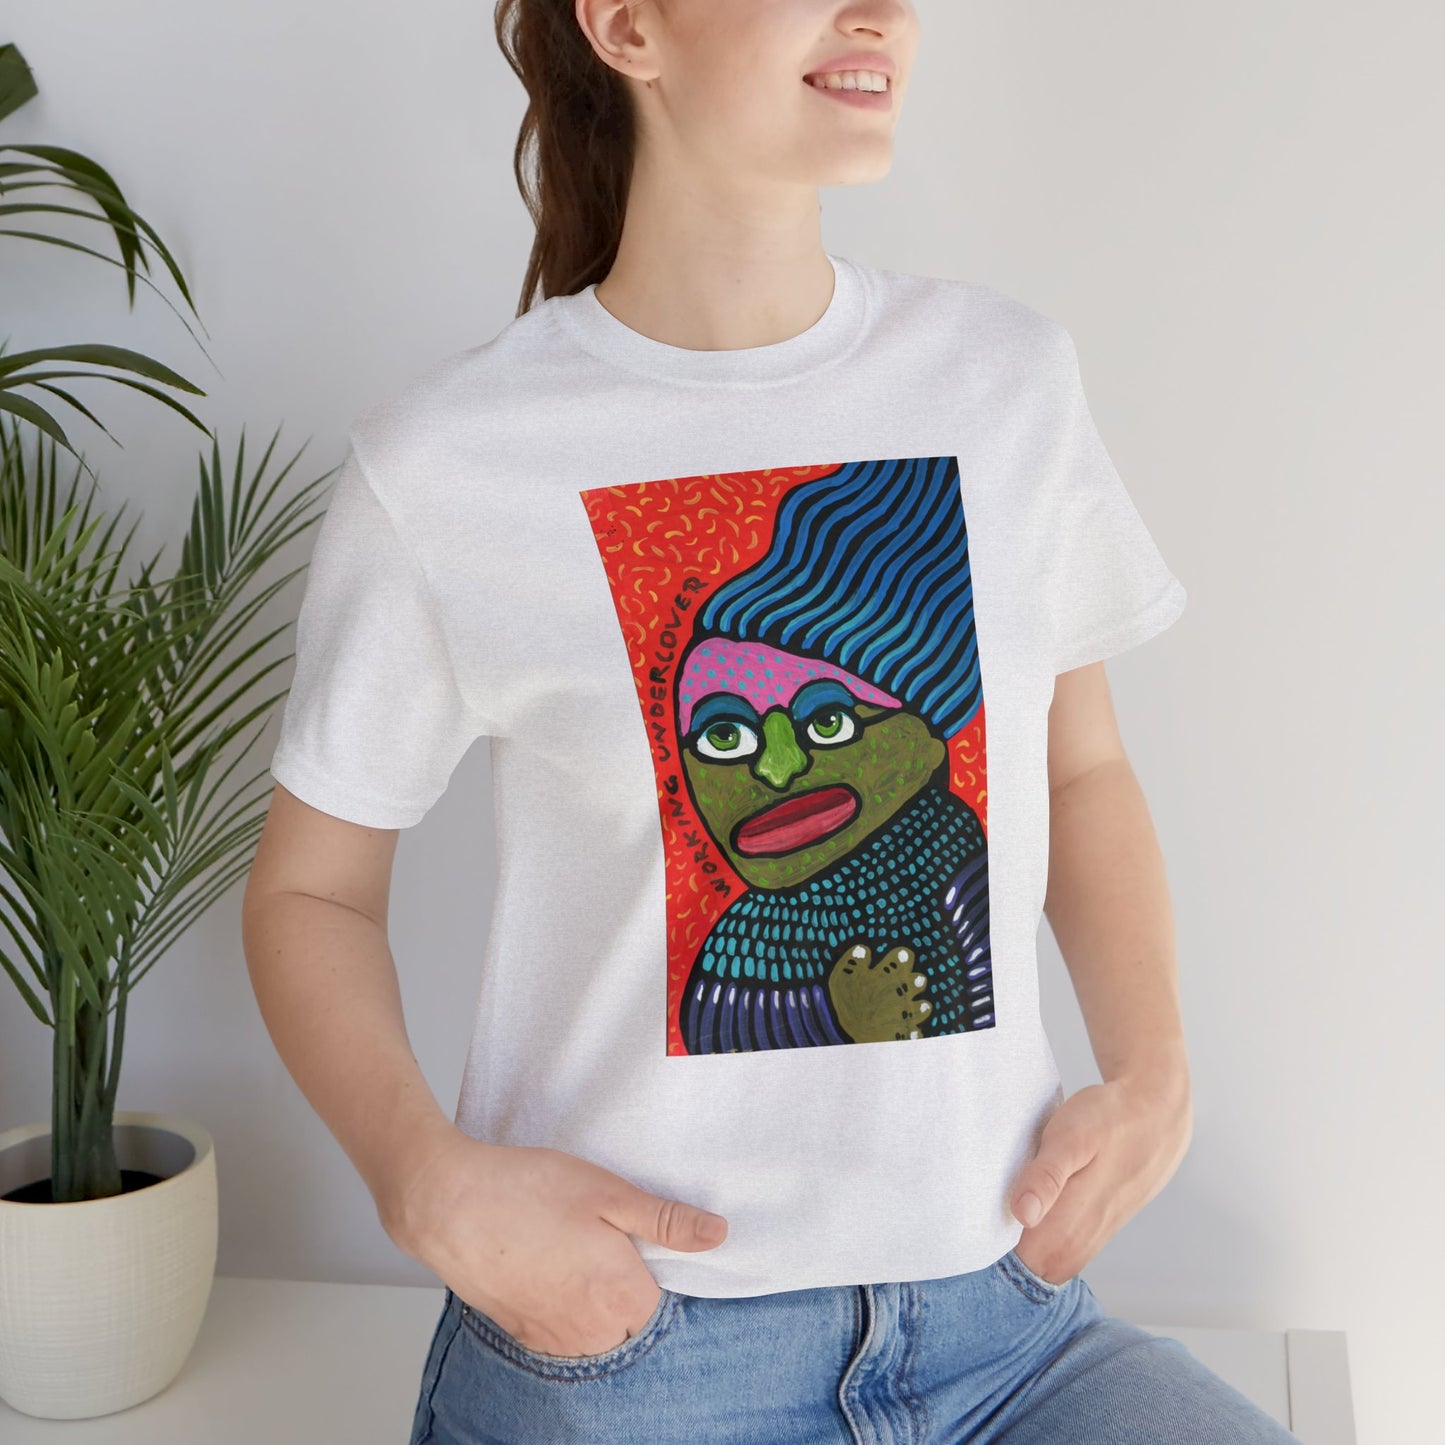 Working Undercover painting short sleeve tee